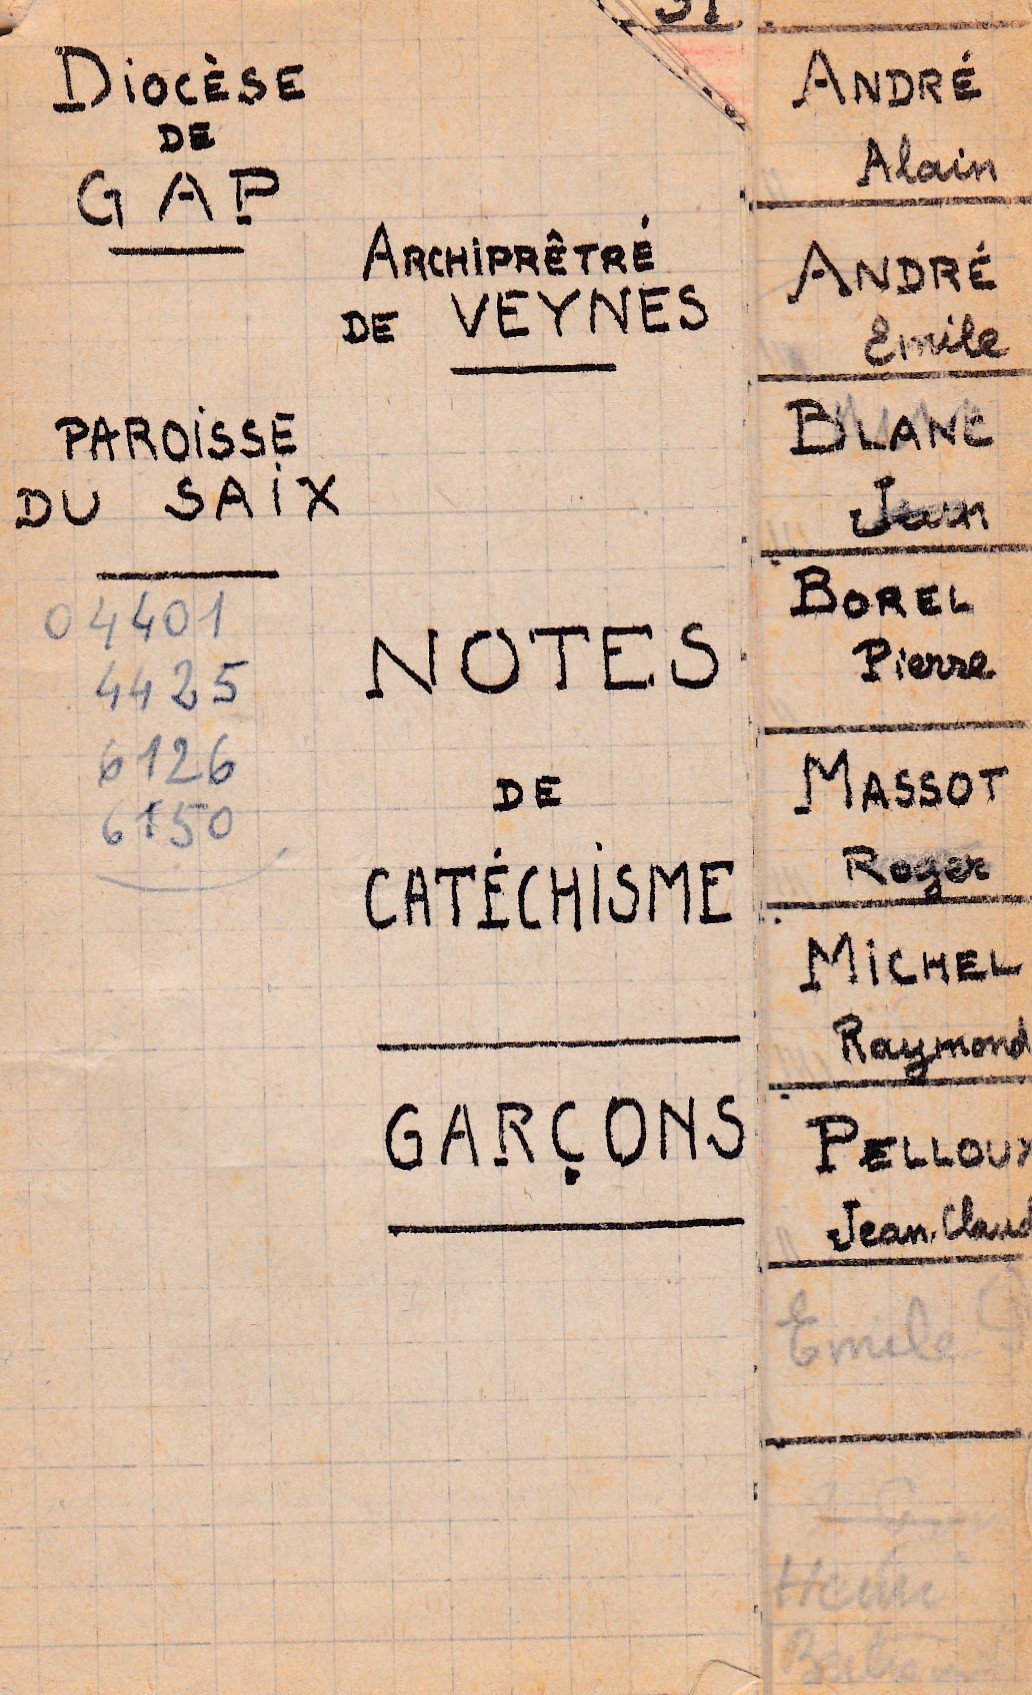 1945NotesDeCatechisme_1945-carnet-notes.jpg